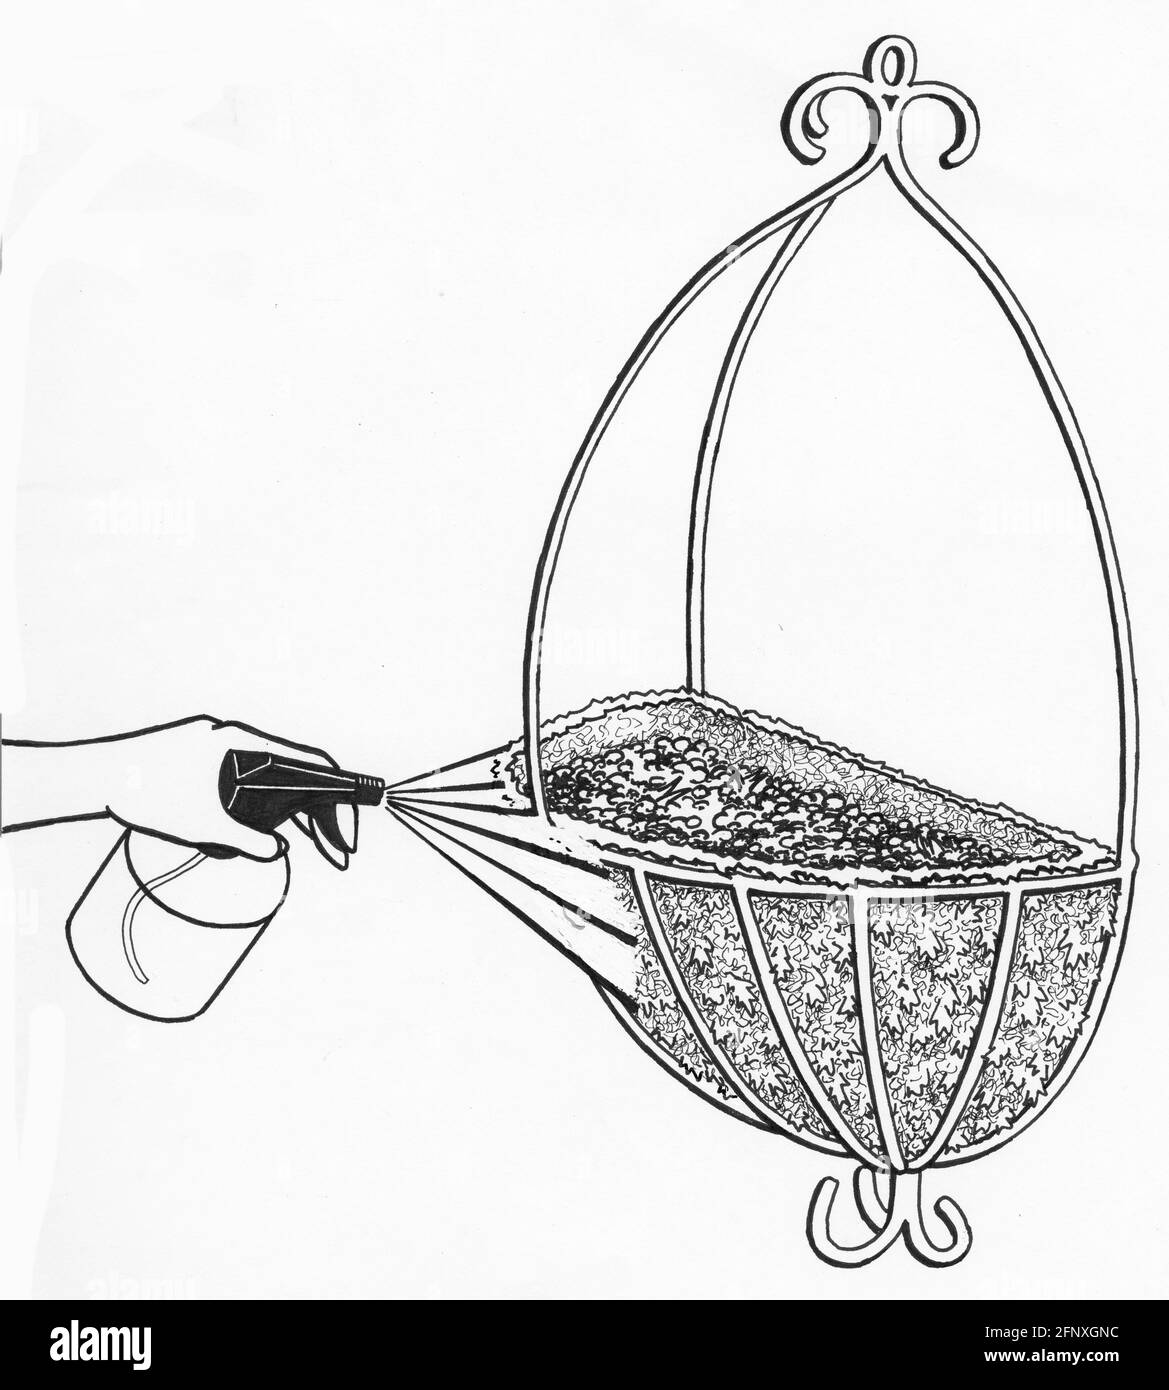 A drawing of a person spraying a wall planter and moss liner with water Stock Photo